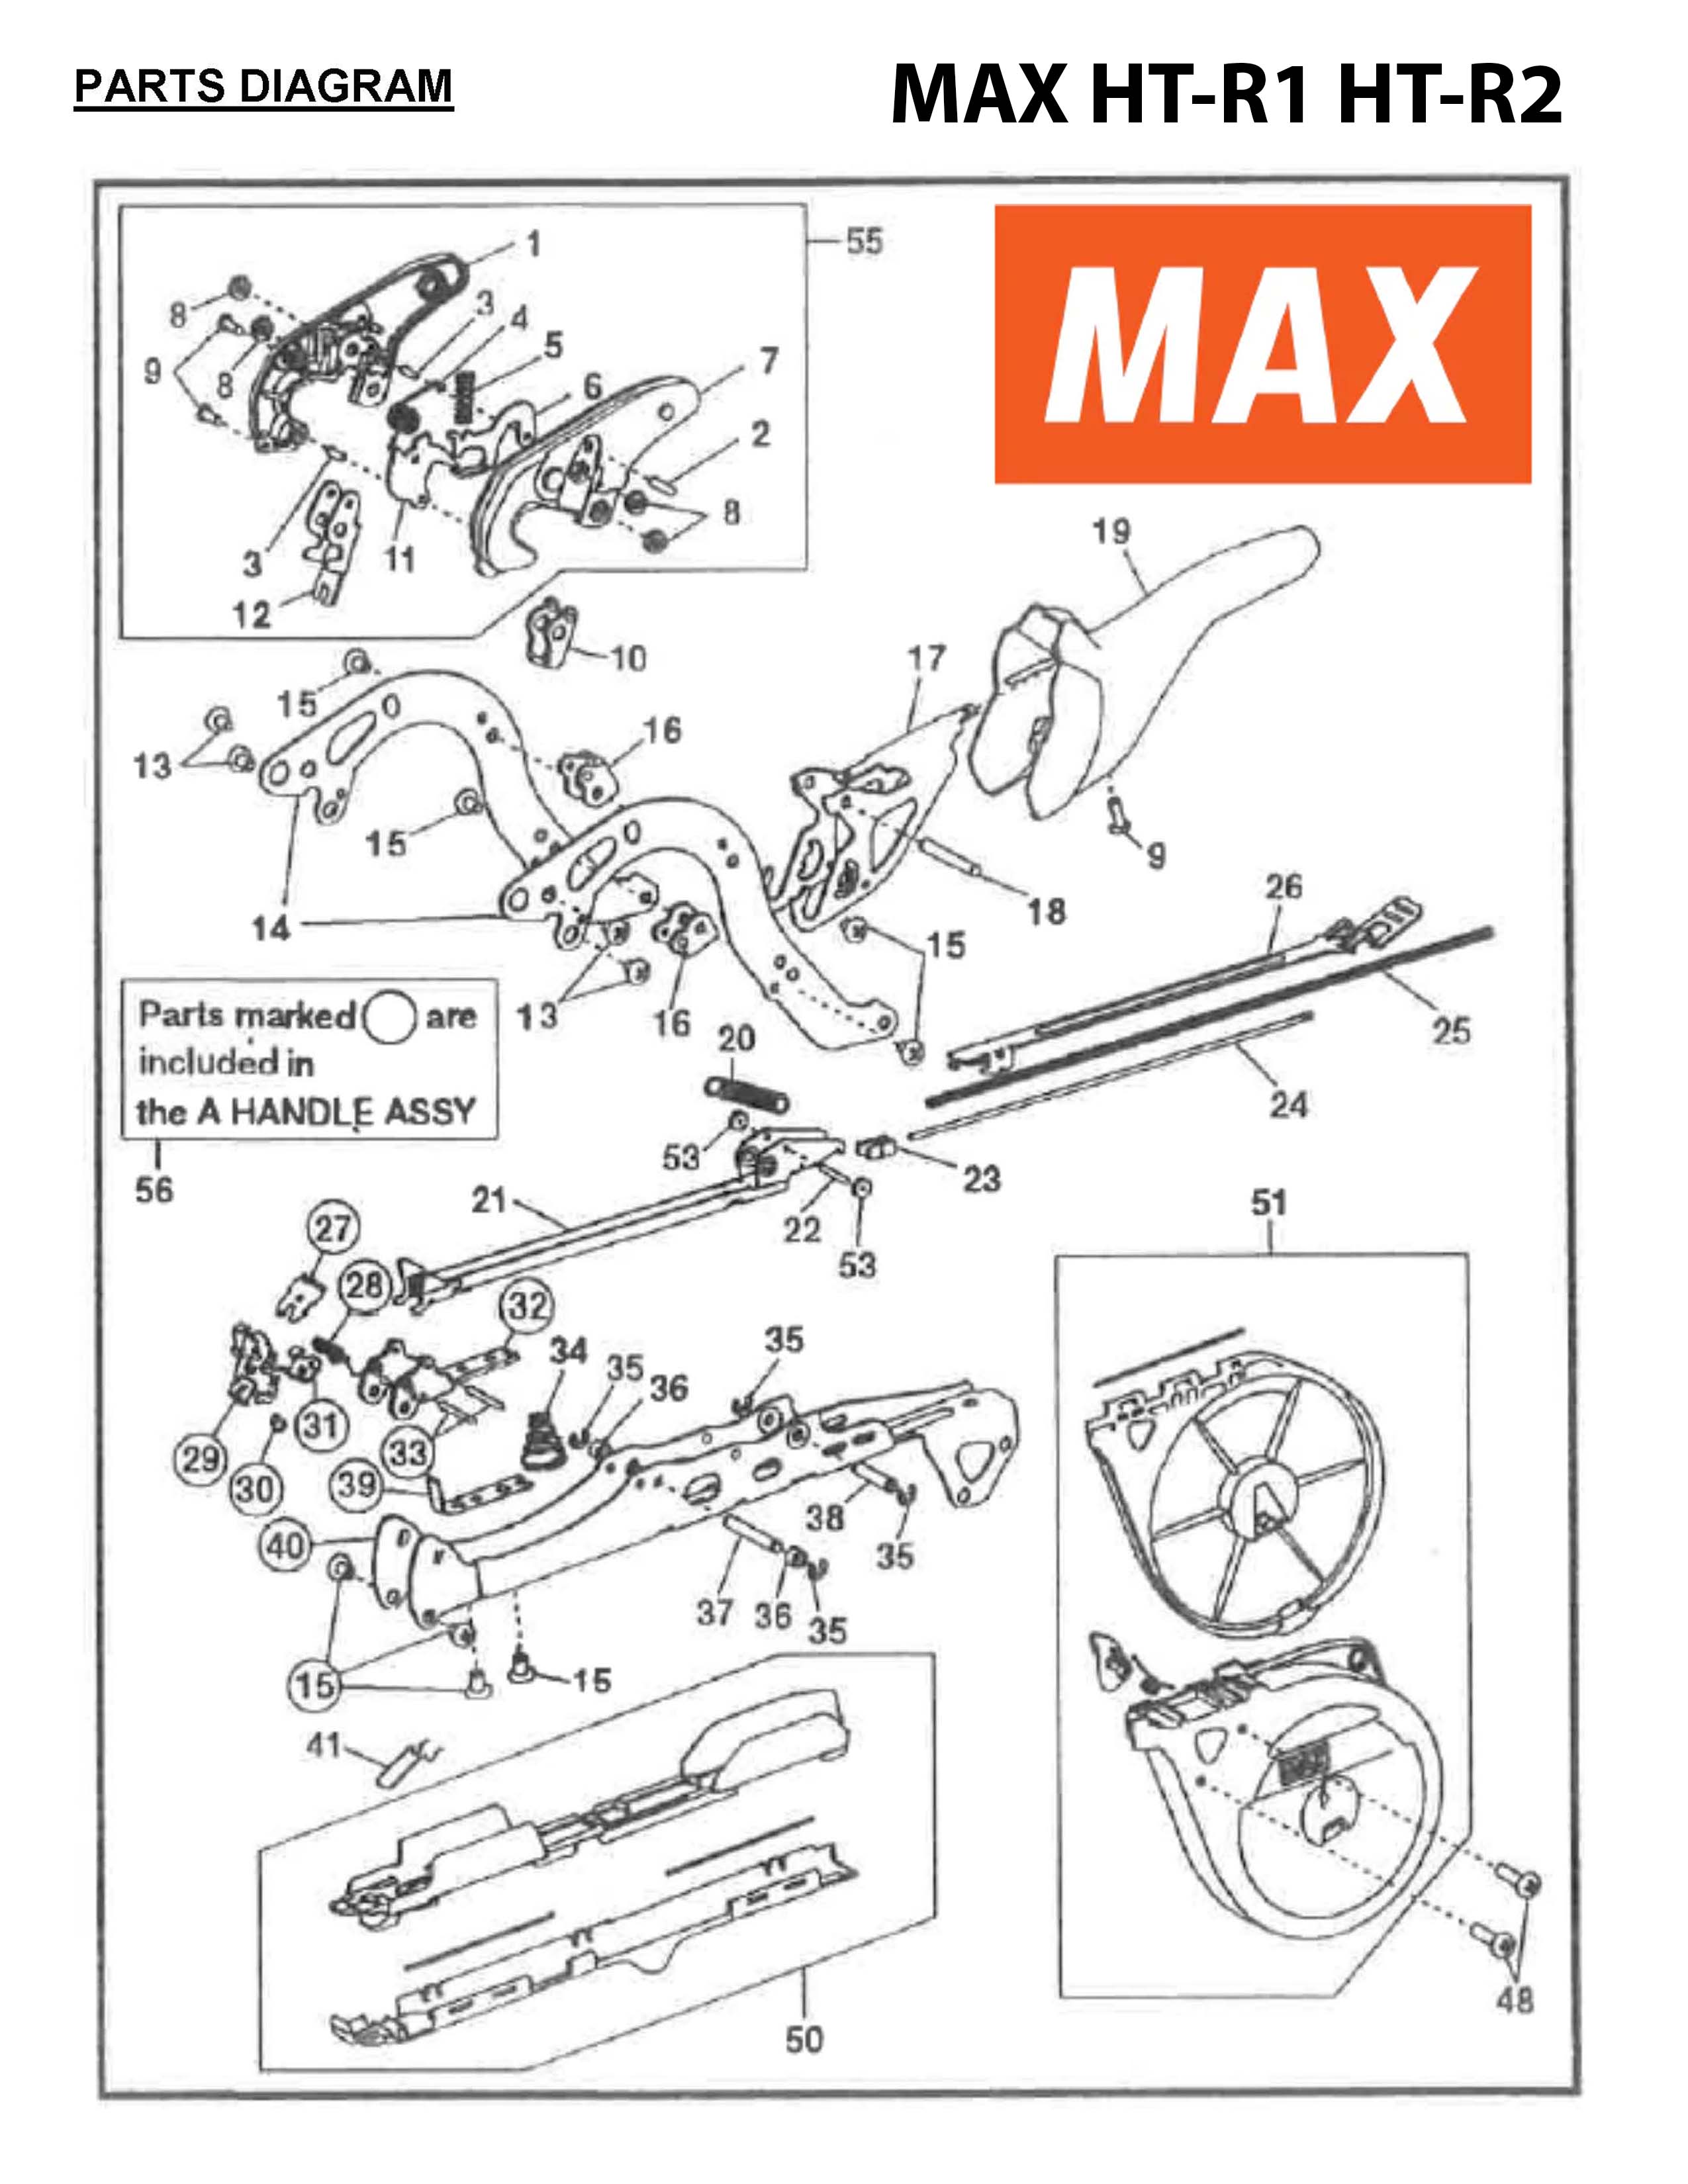 MAX Tapener Part HT11596 TAPE GUIDE SUPPORT Fits MAX HT-R1 HT-R2 #31